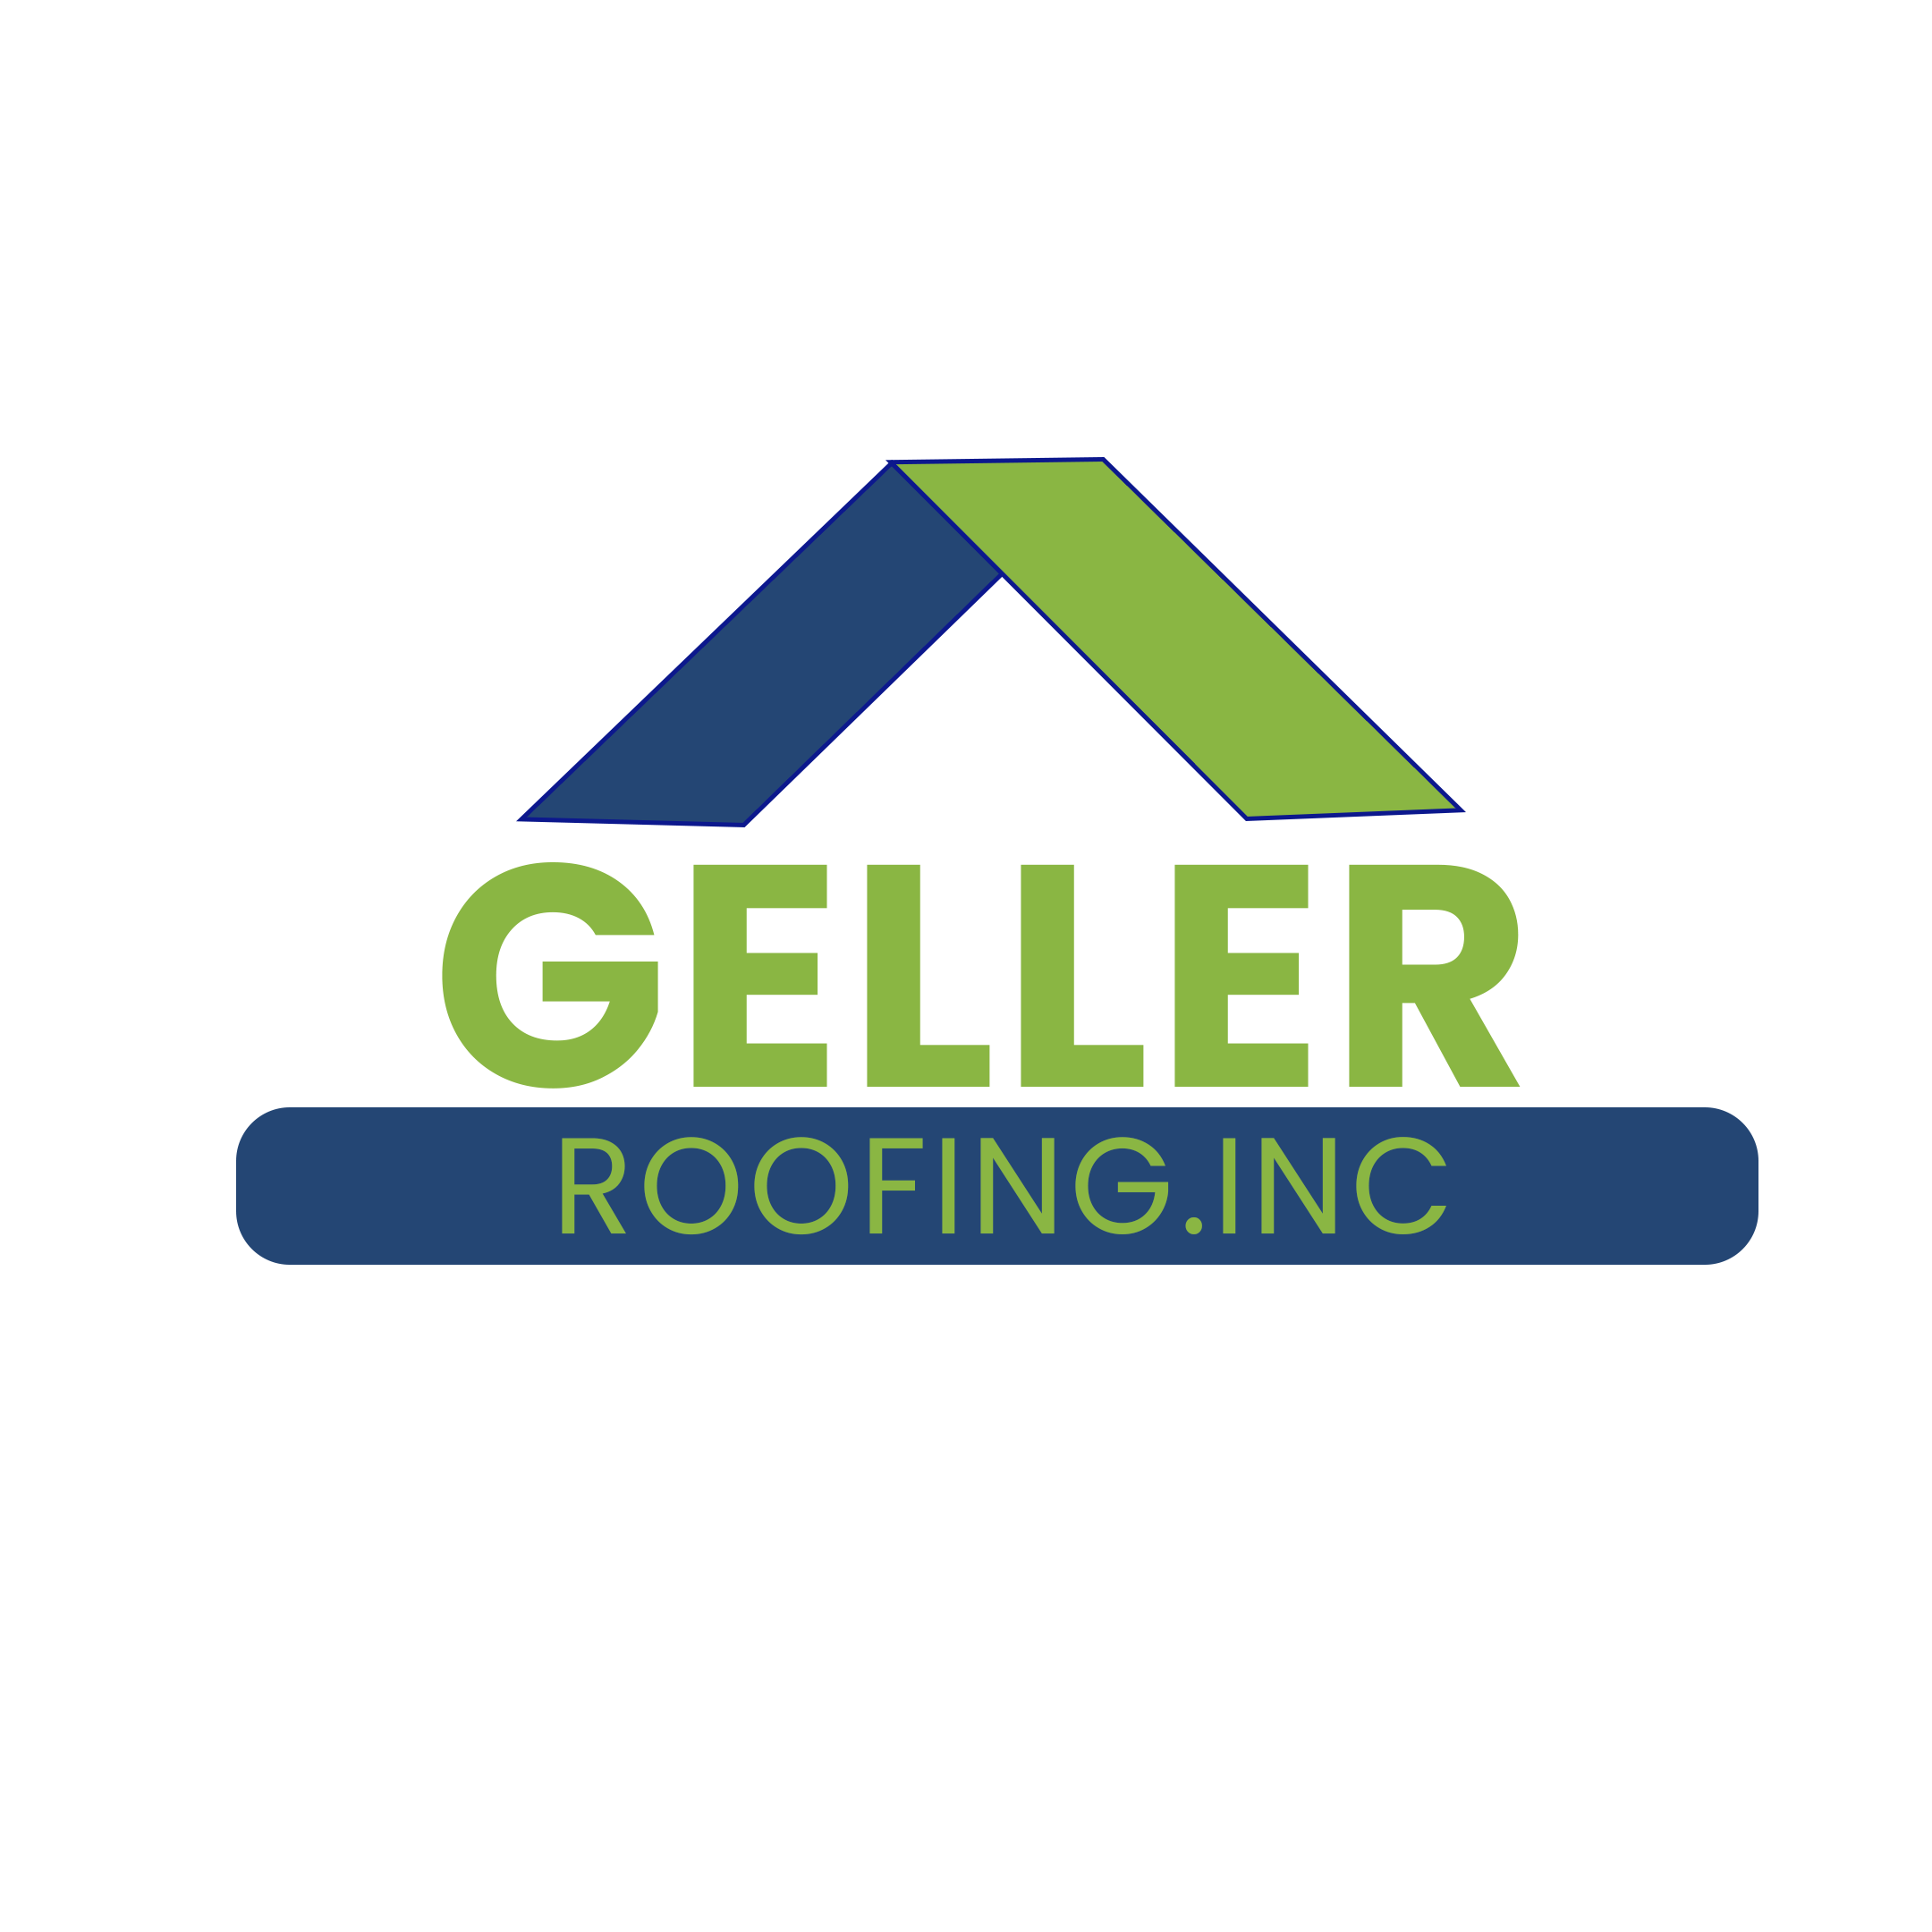 Roof Repair and Installation | Geller Roofing - Florida